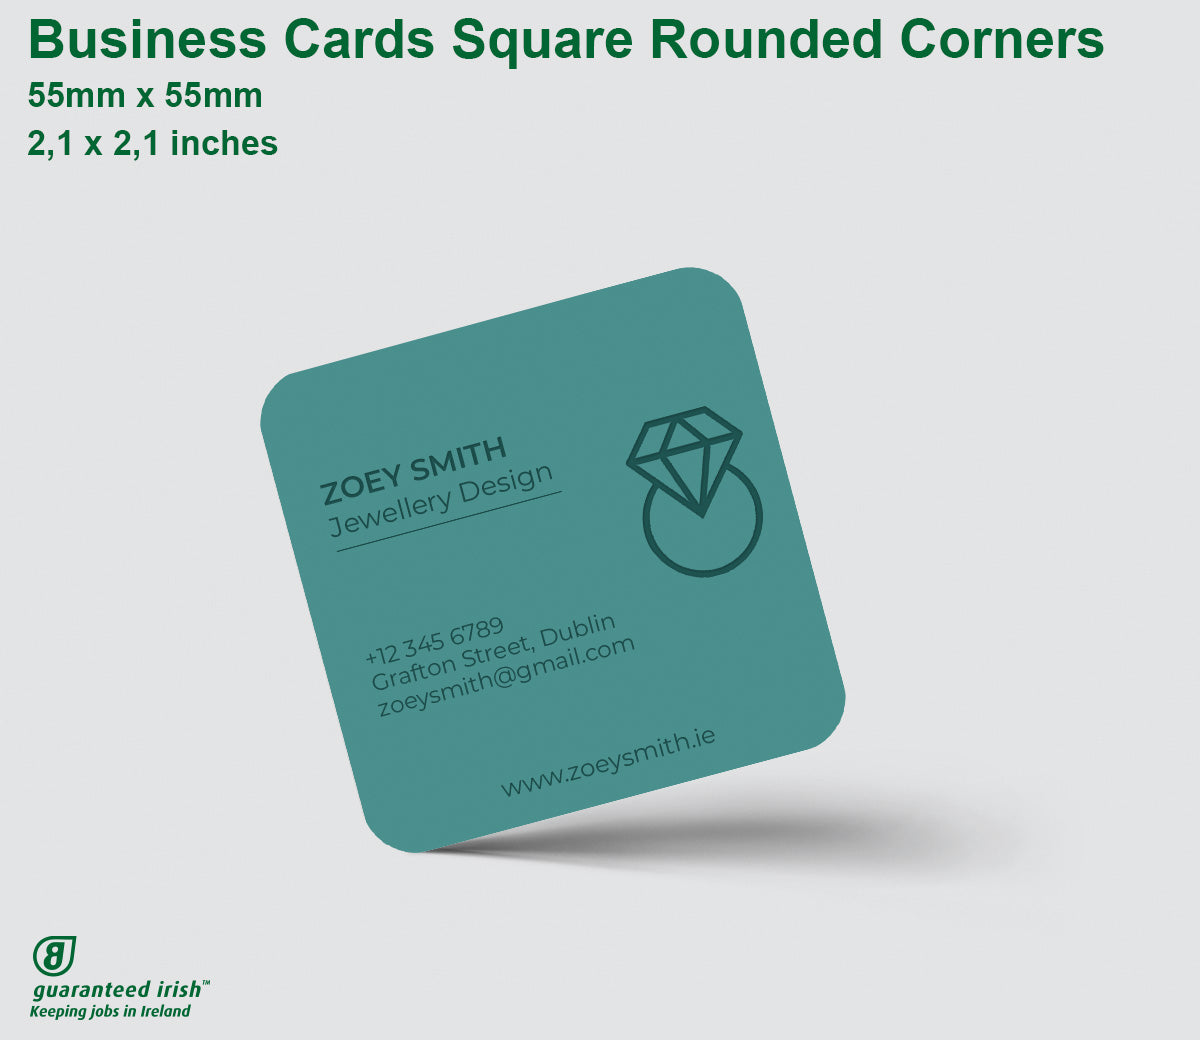 Business Cards - Square 55mm × 55mm rounded corners